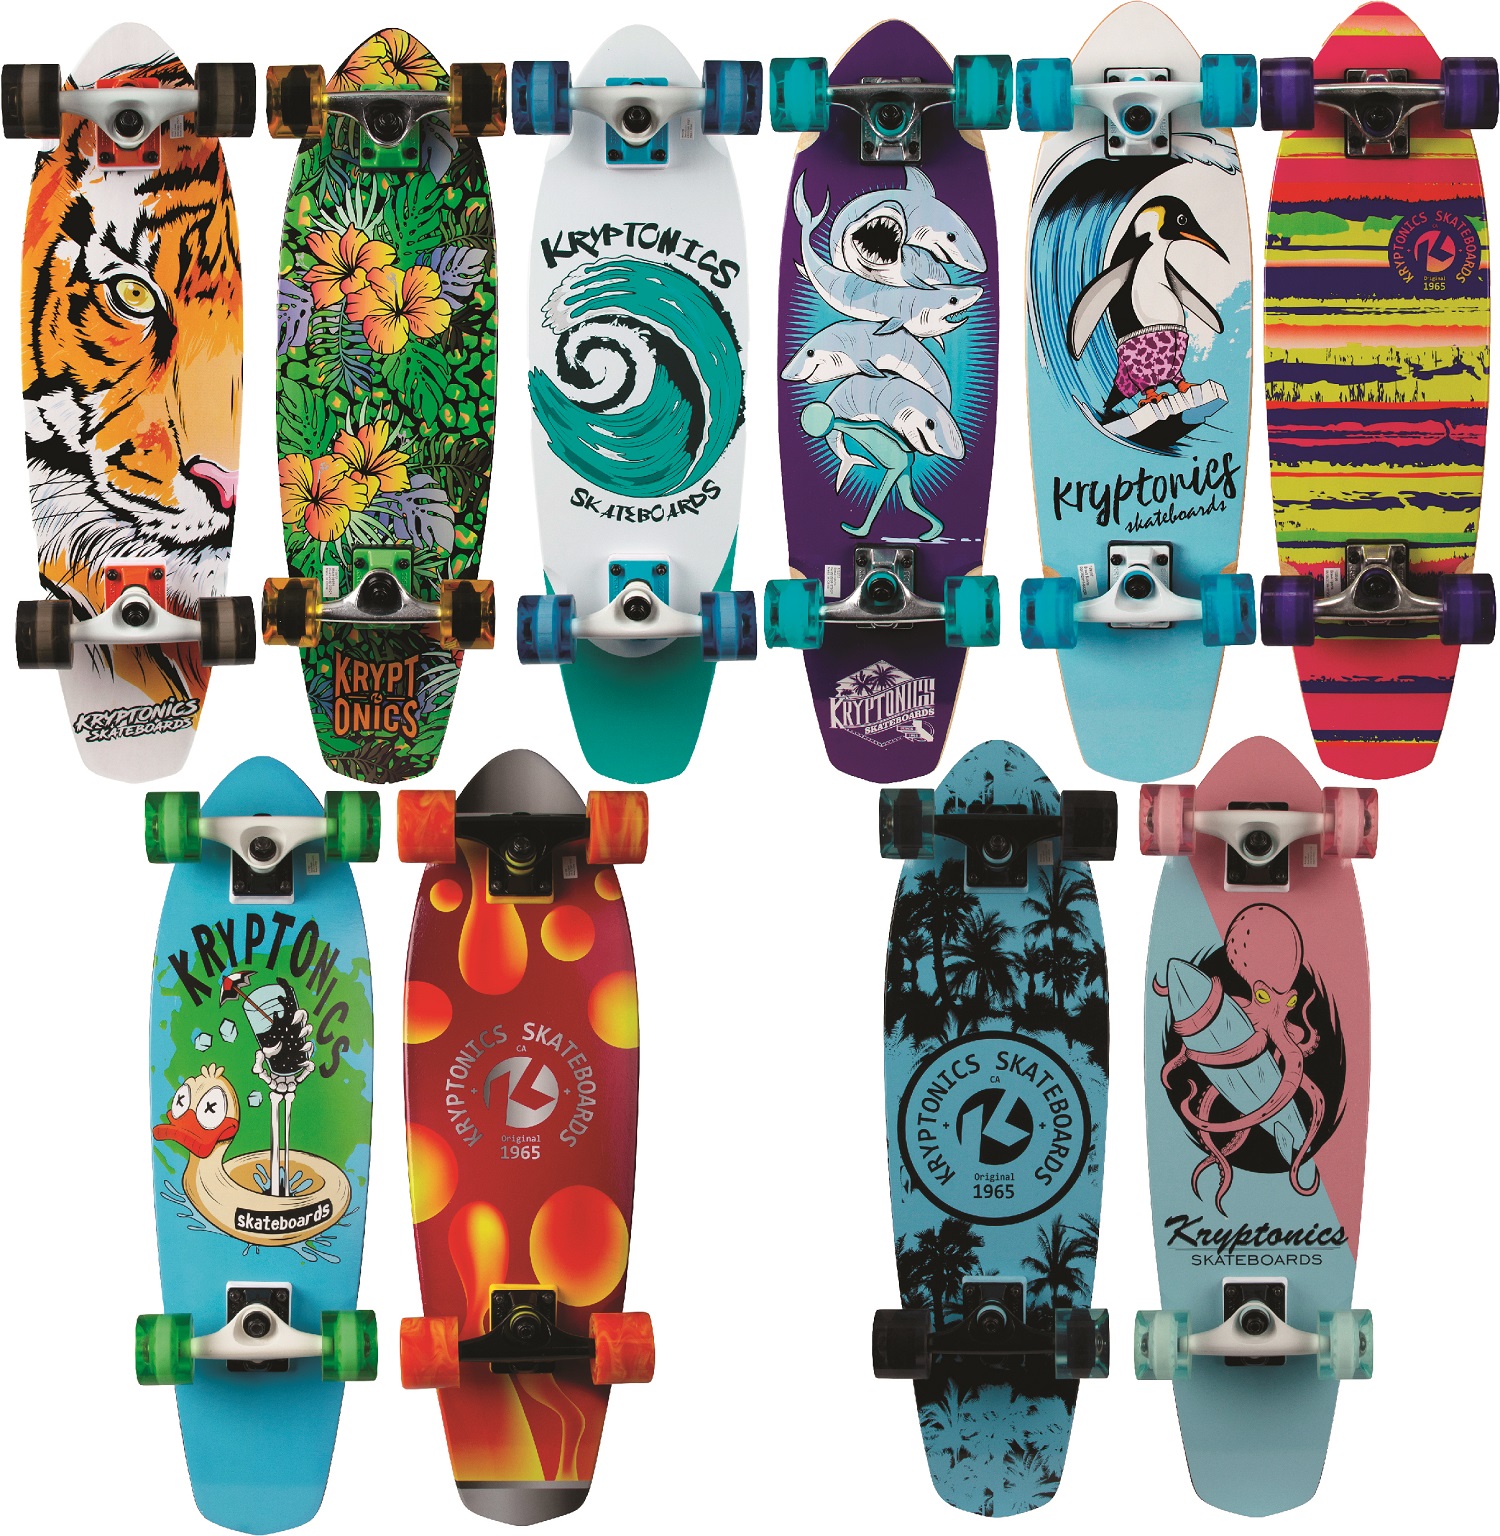 Kryptonics 28 In. Complete Cruiser Skateboard (28 In. x 8 In.) - Wave of Life - image 1 of 8